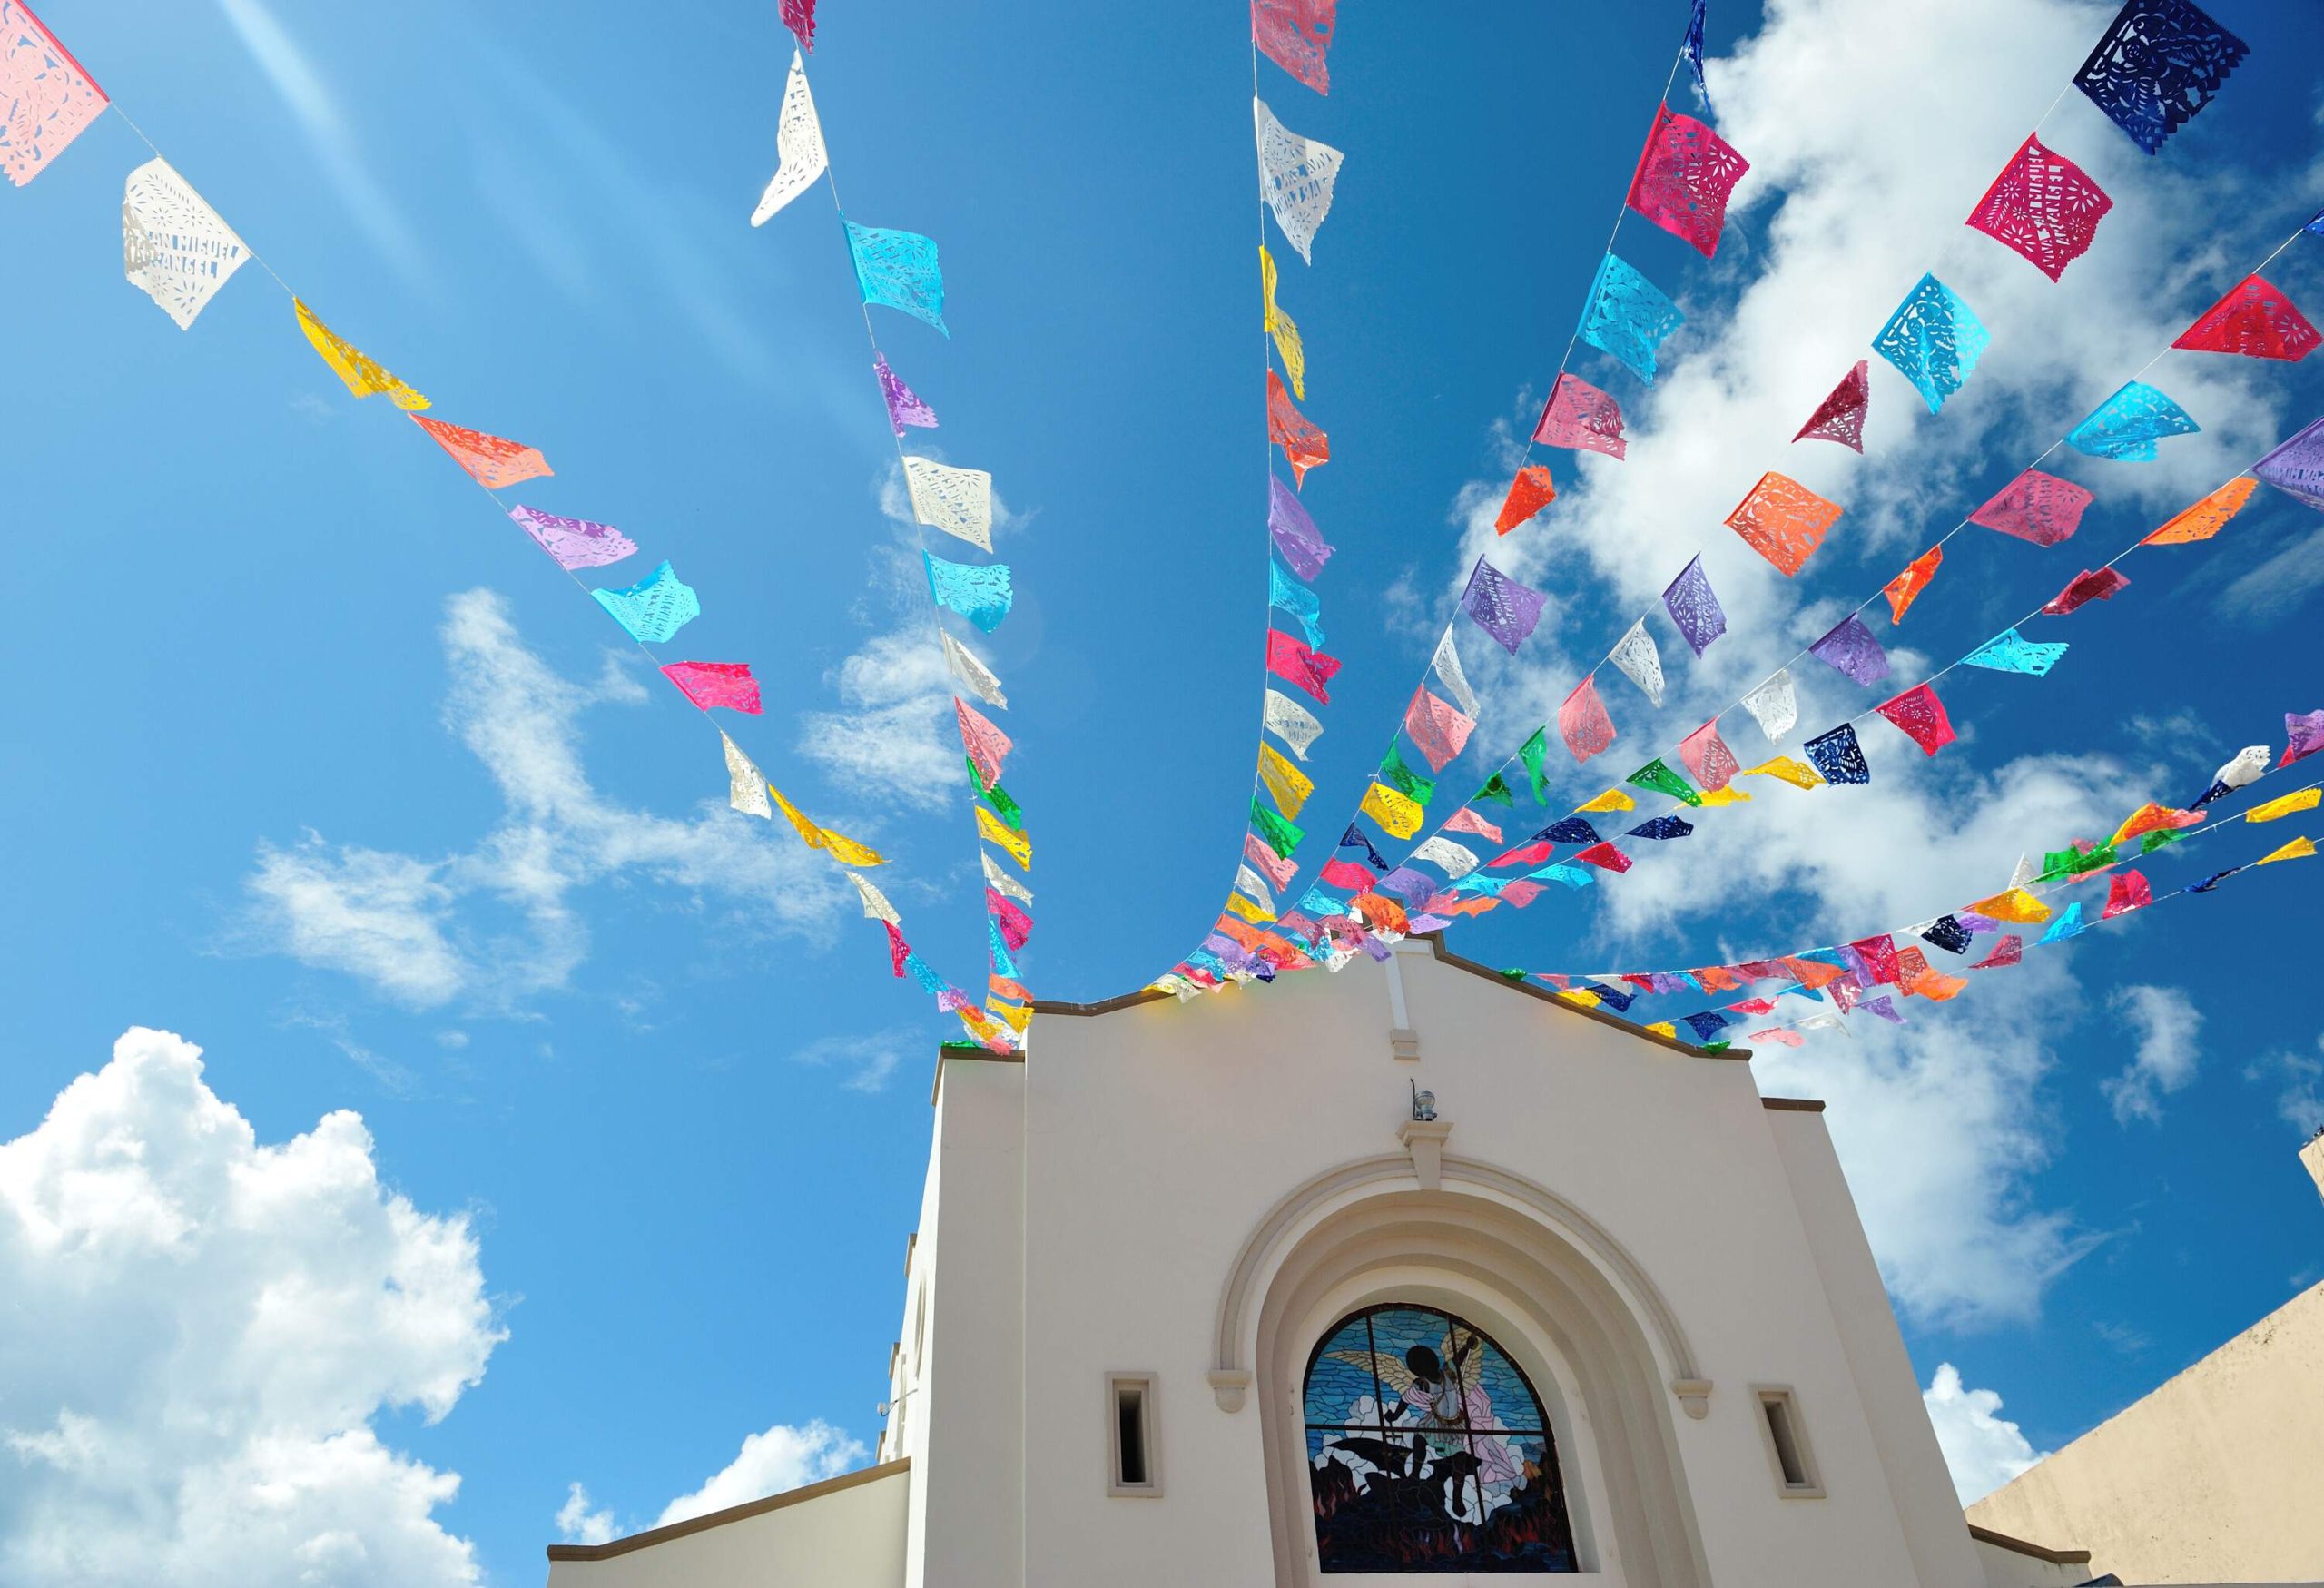 Colourful small flags hang in front of a white facade church.